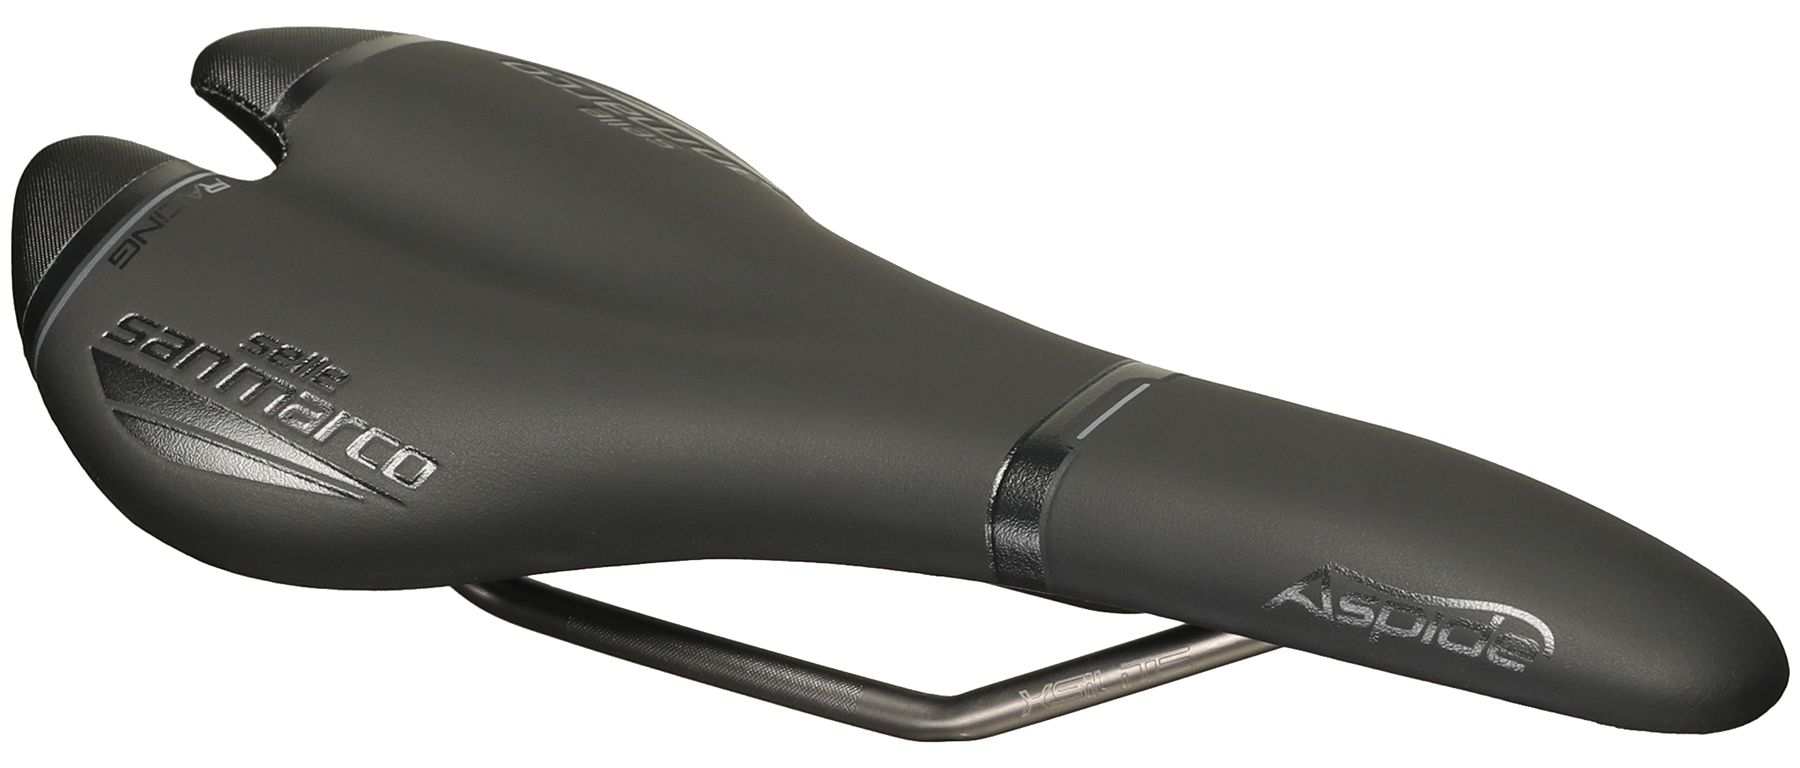 Selle San Marco Aspide Racing Xsilite Full-Fit Saddle